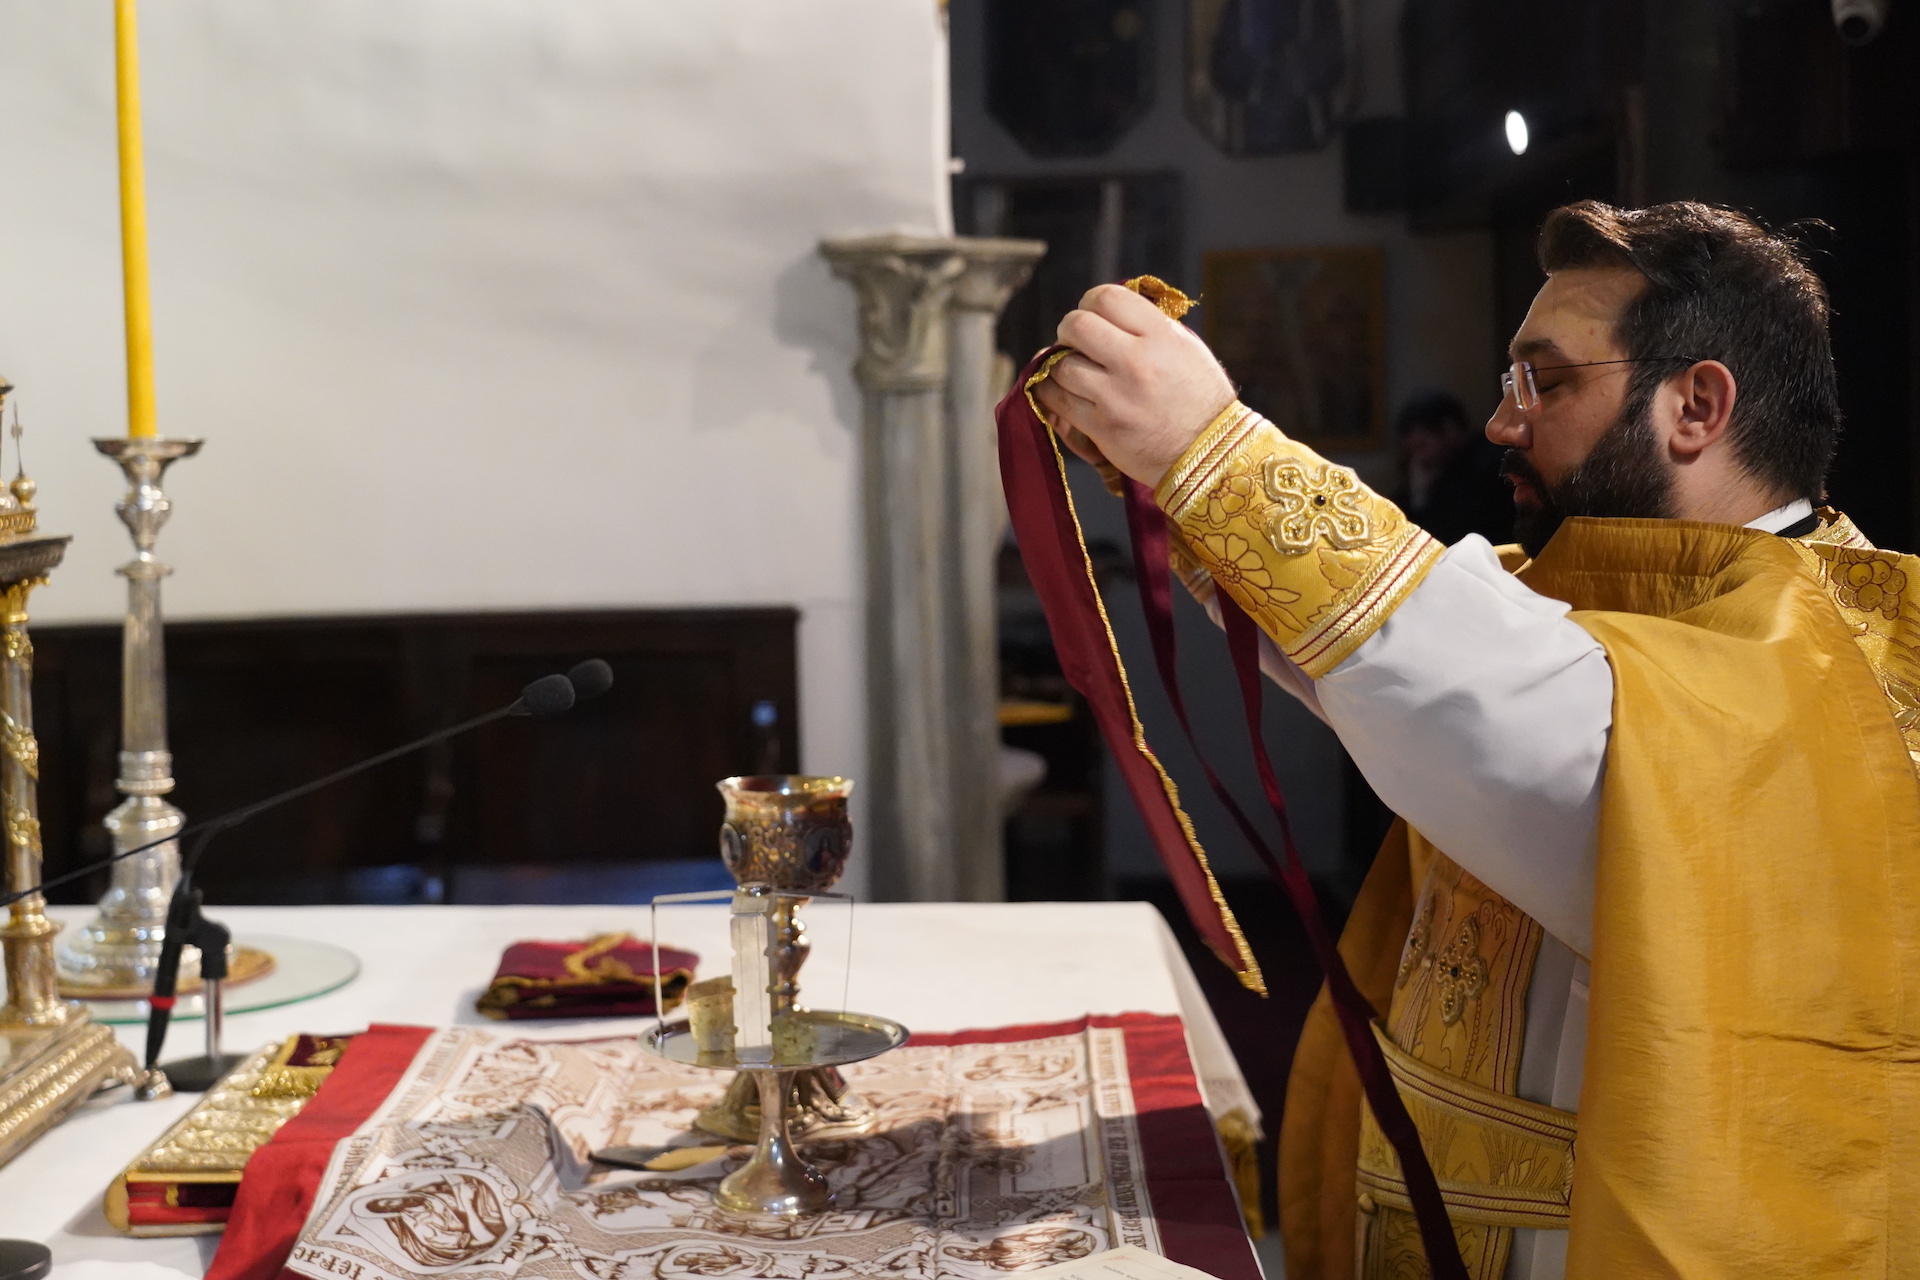 Metropolitan of Leros, Kalymnos and Astypalea officiates at the Patriarchal Church of Saint George